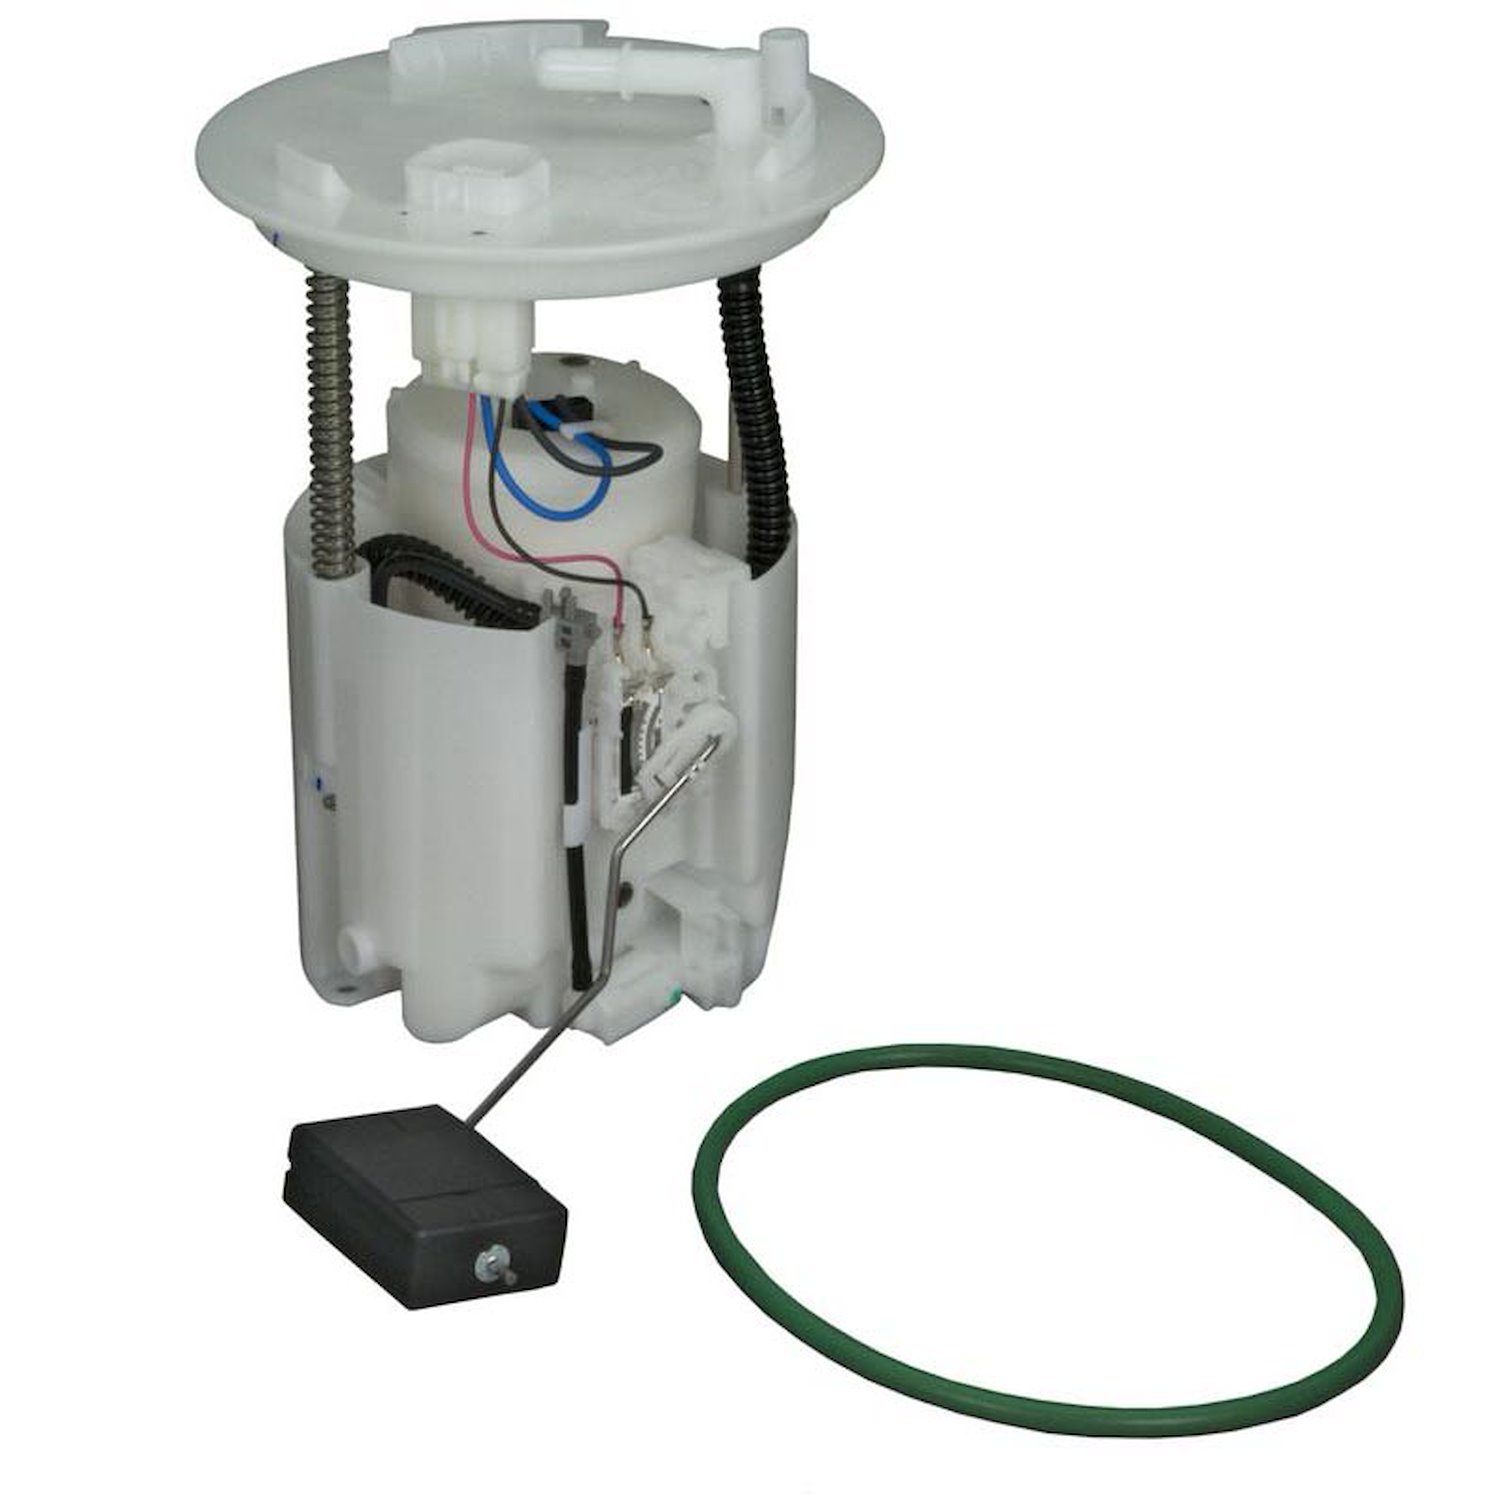 OE Ford Replacement Fuel Pump Module Assembly for 2006 Ford Fusion/Lincoln Zephyr/Mercury Milan